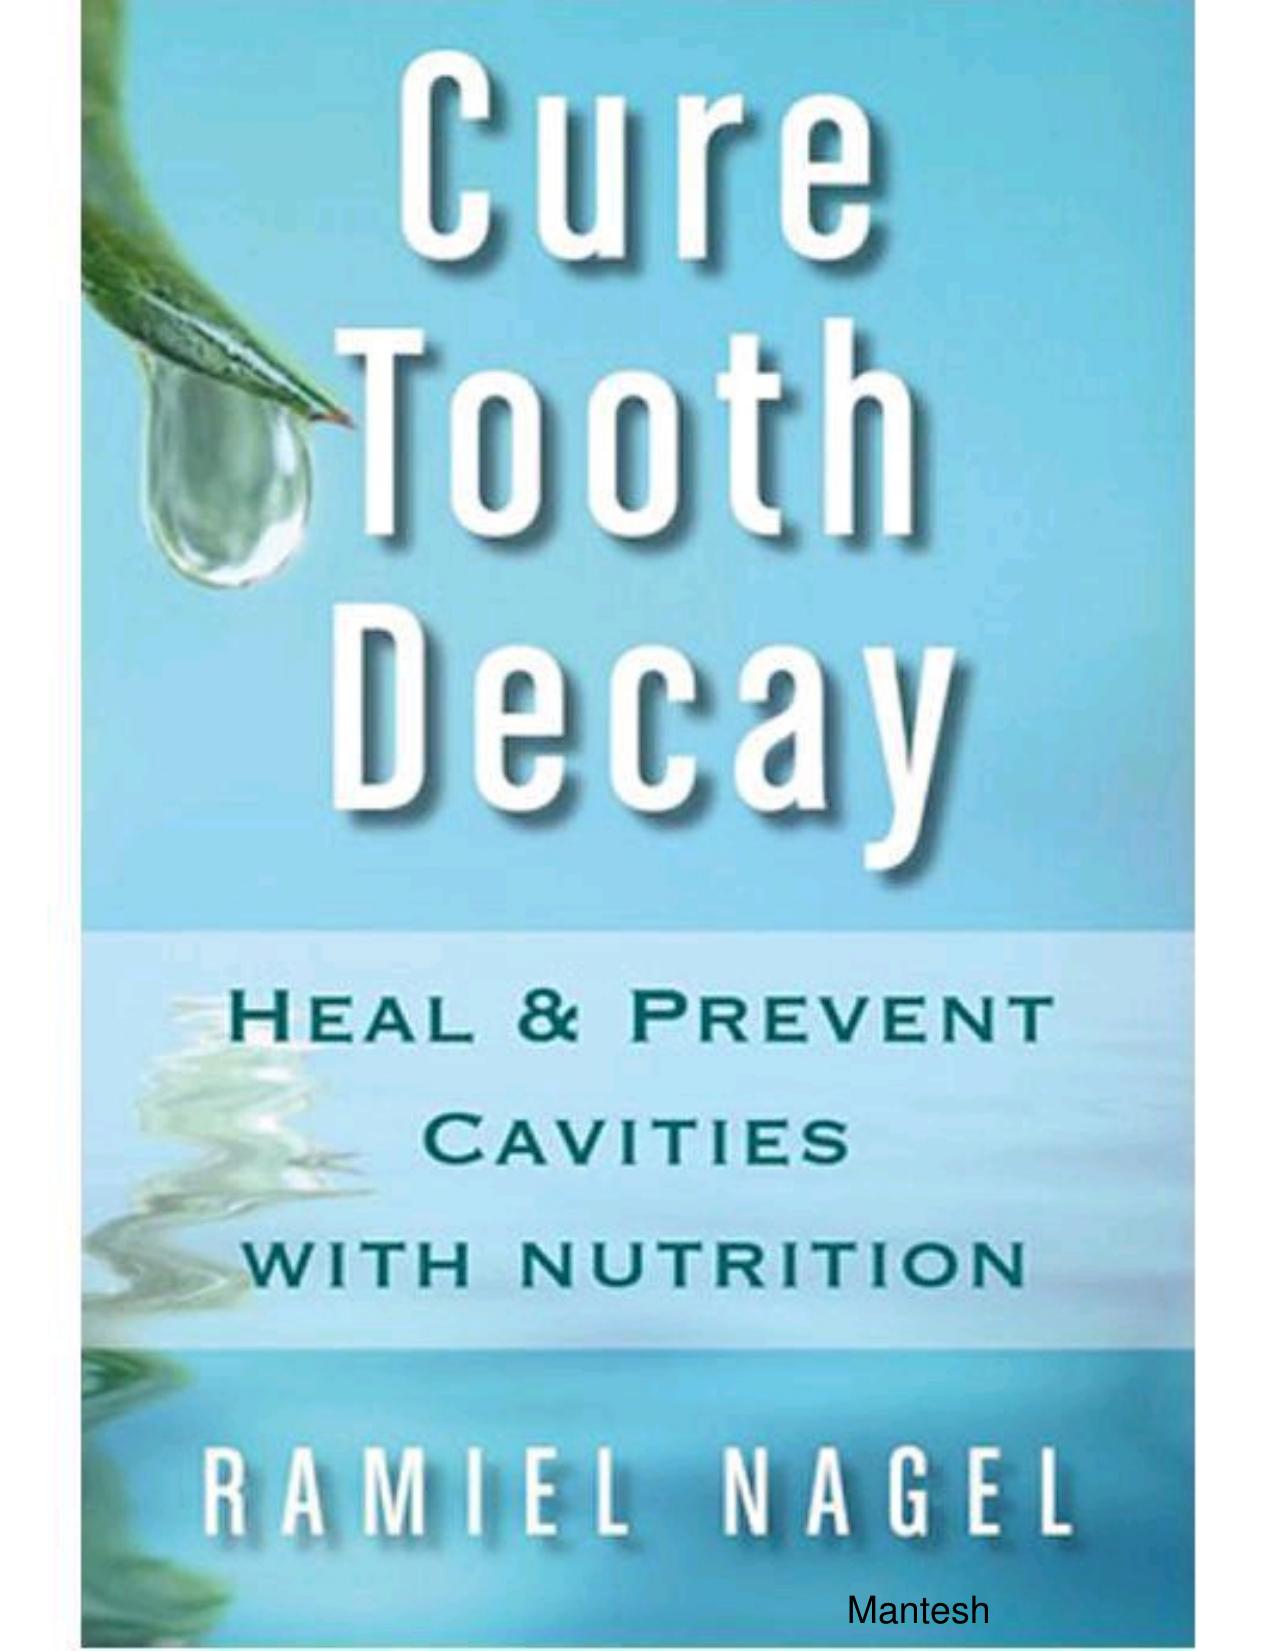 Cure Tooth Decay: Heal And Prevent Cavities With Nutrition - Limit And Avoid Dental Surgery and Fluoride [Second Edition] 5 Stars by Nagel Ramiel